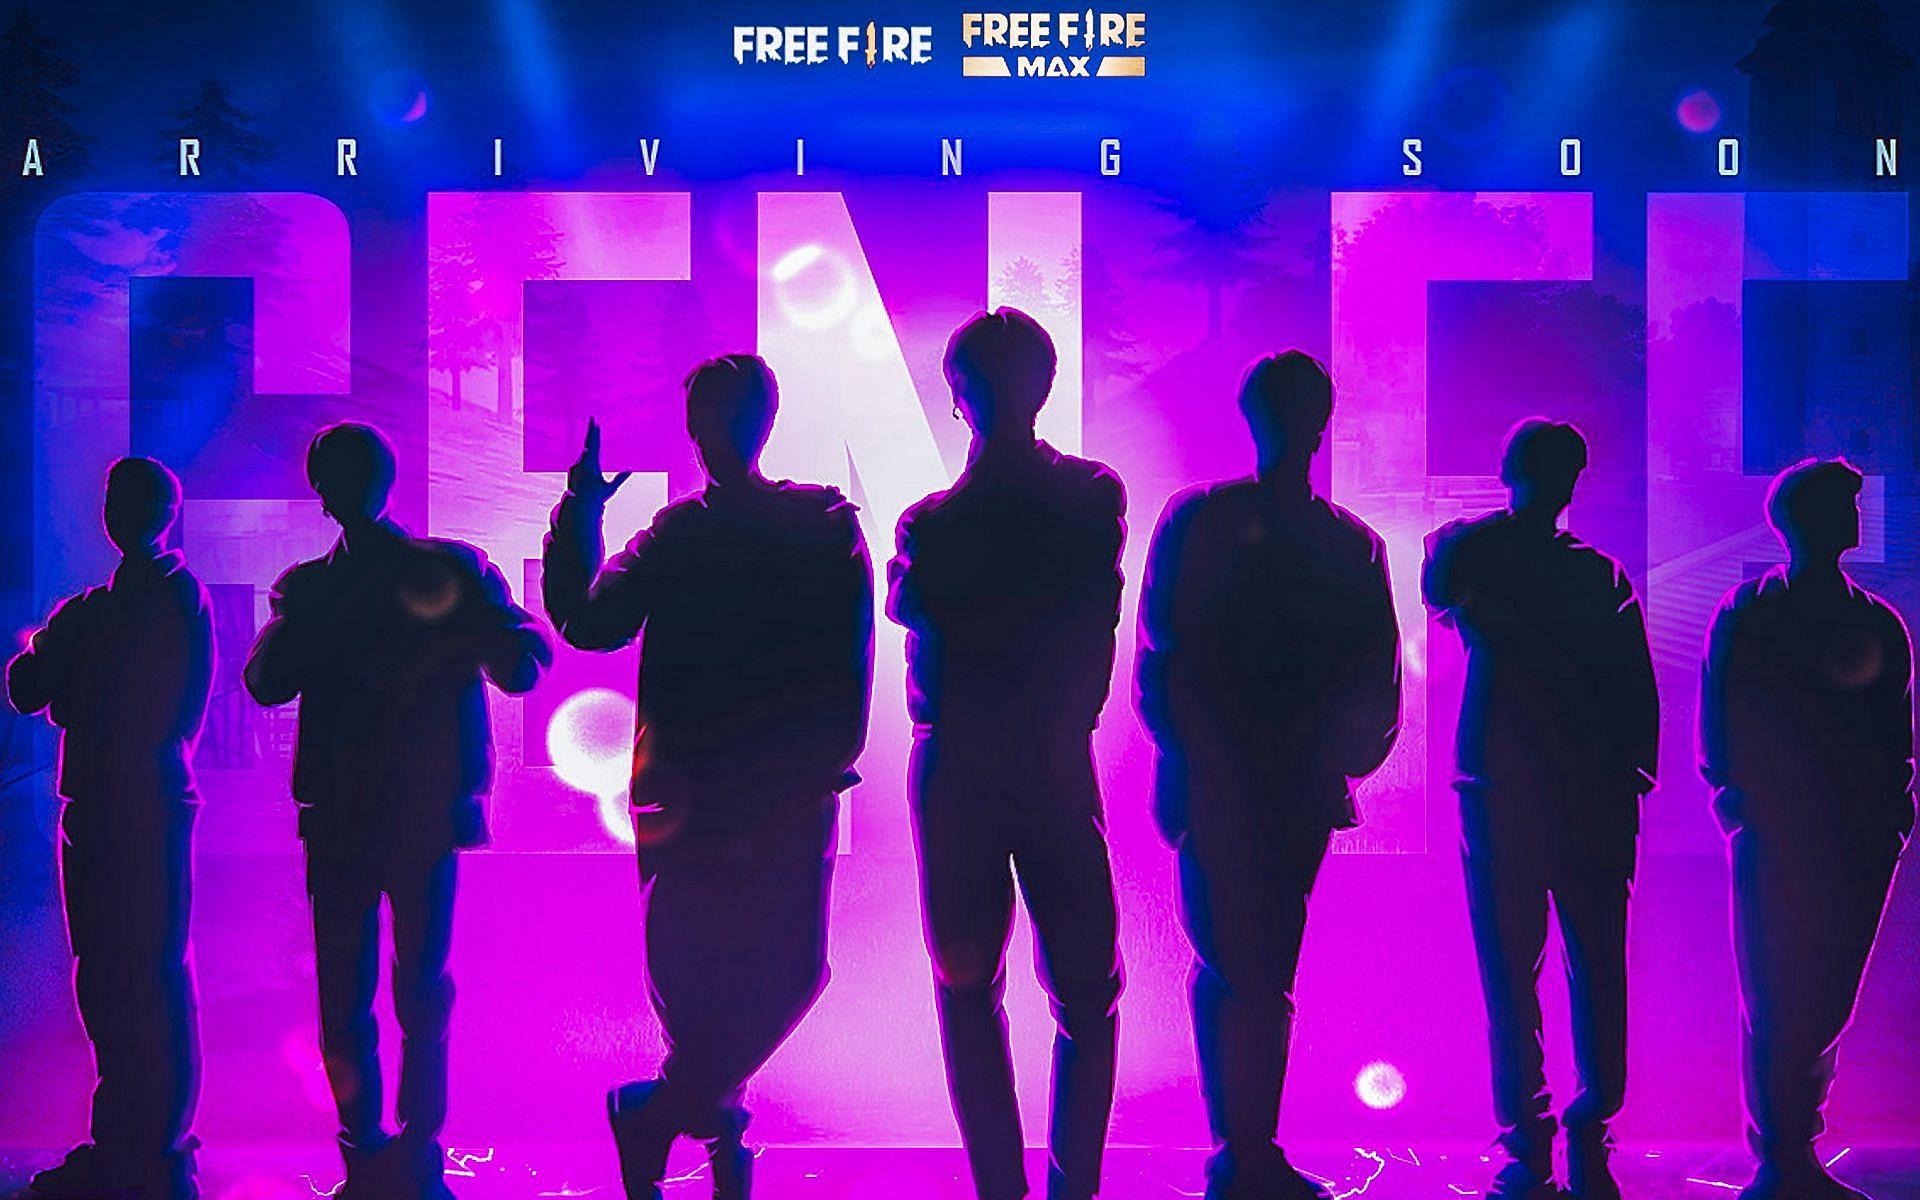 Free Fire fans are excited about the BTS collaboration (Image via Garena)